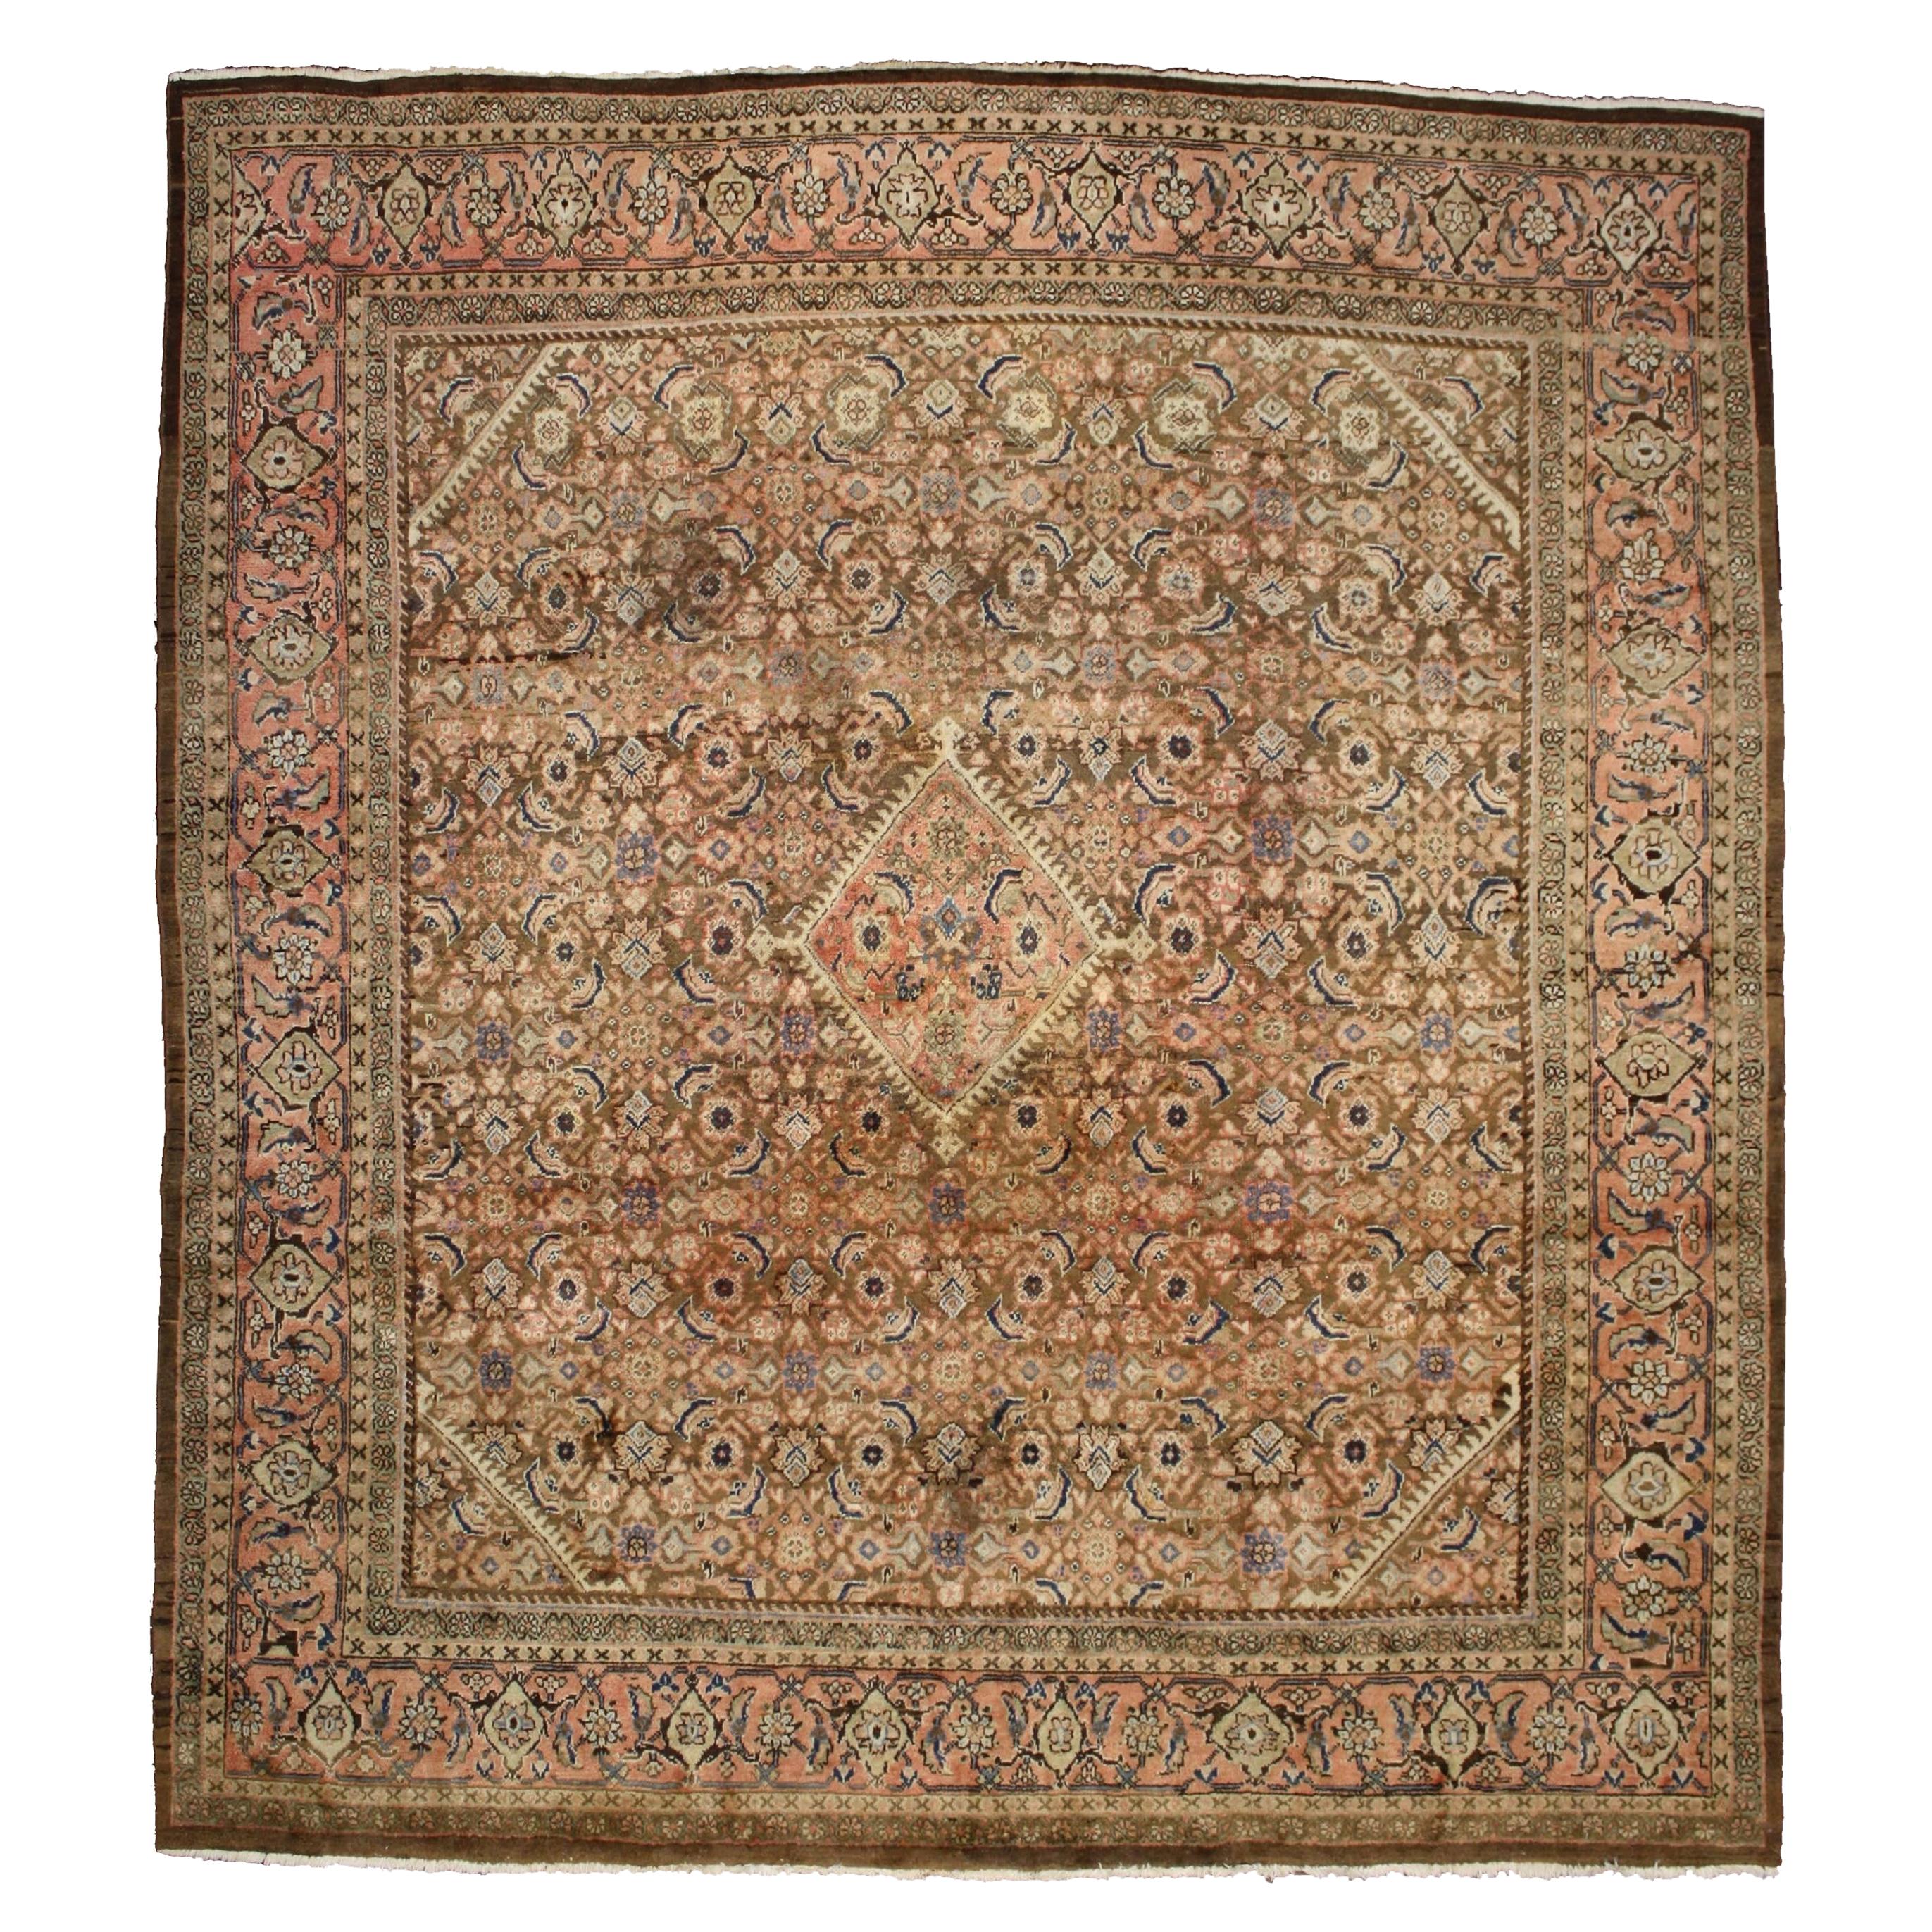 Vintage Persian Mahal Rug with English Country Cottage Style